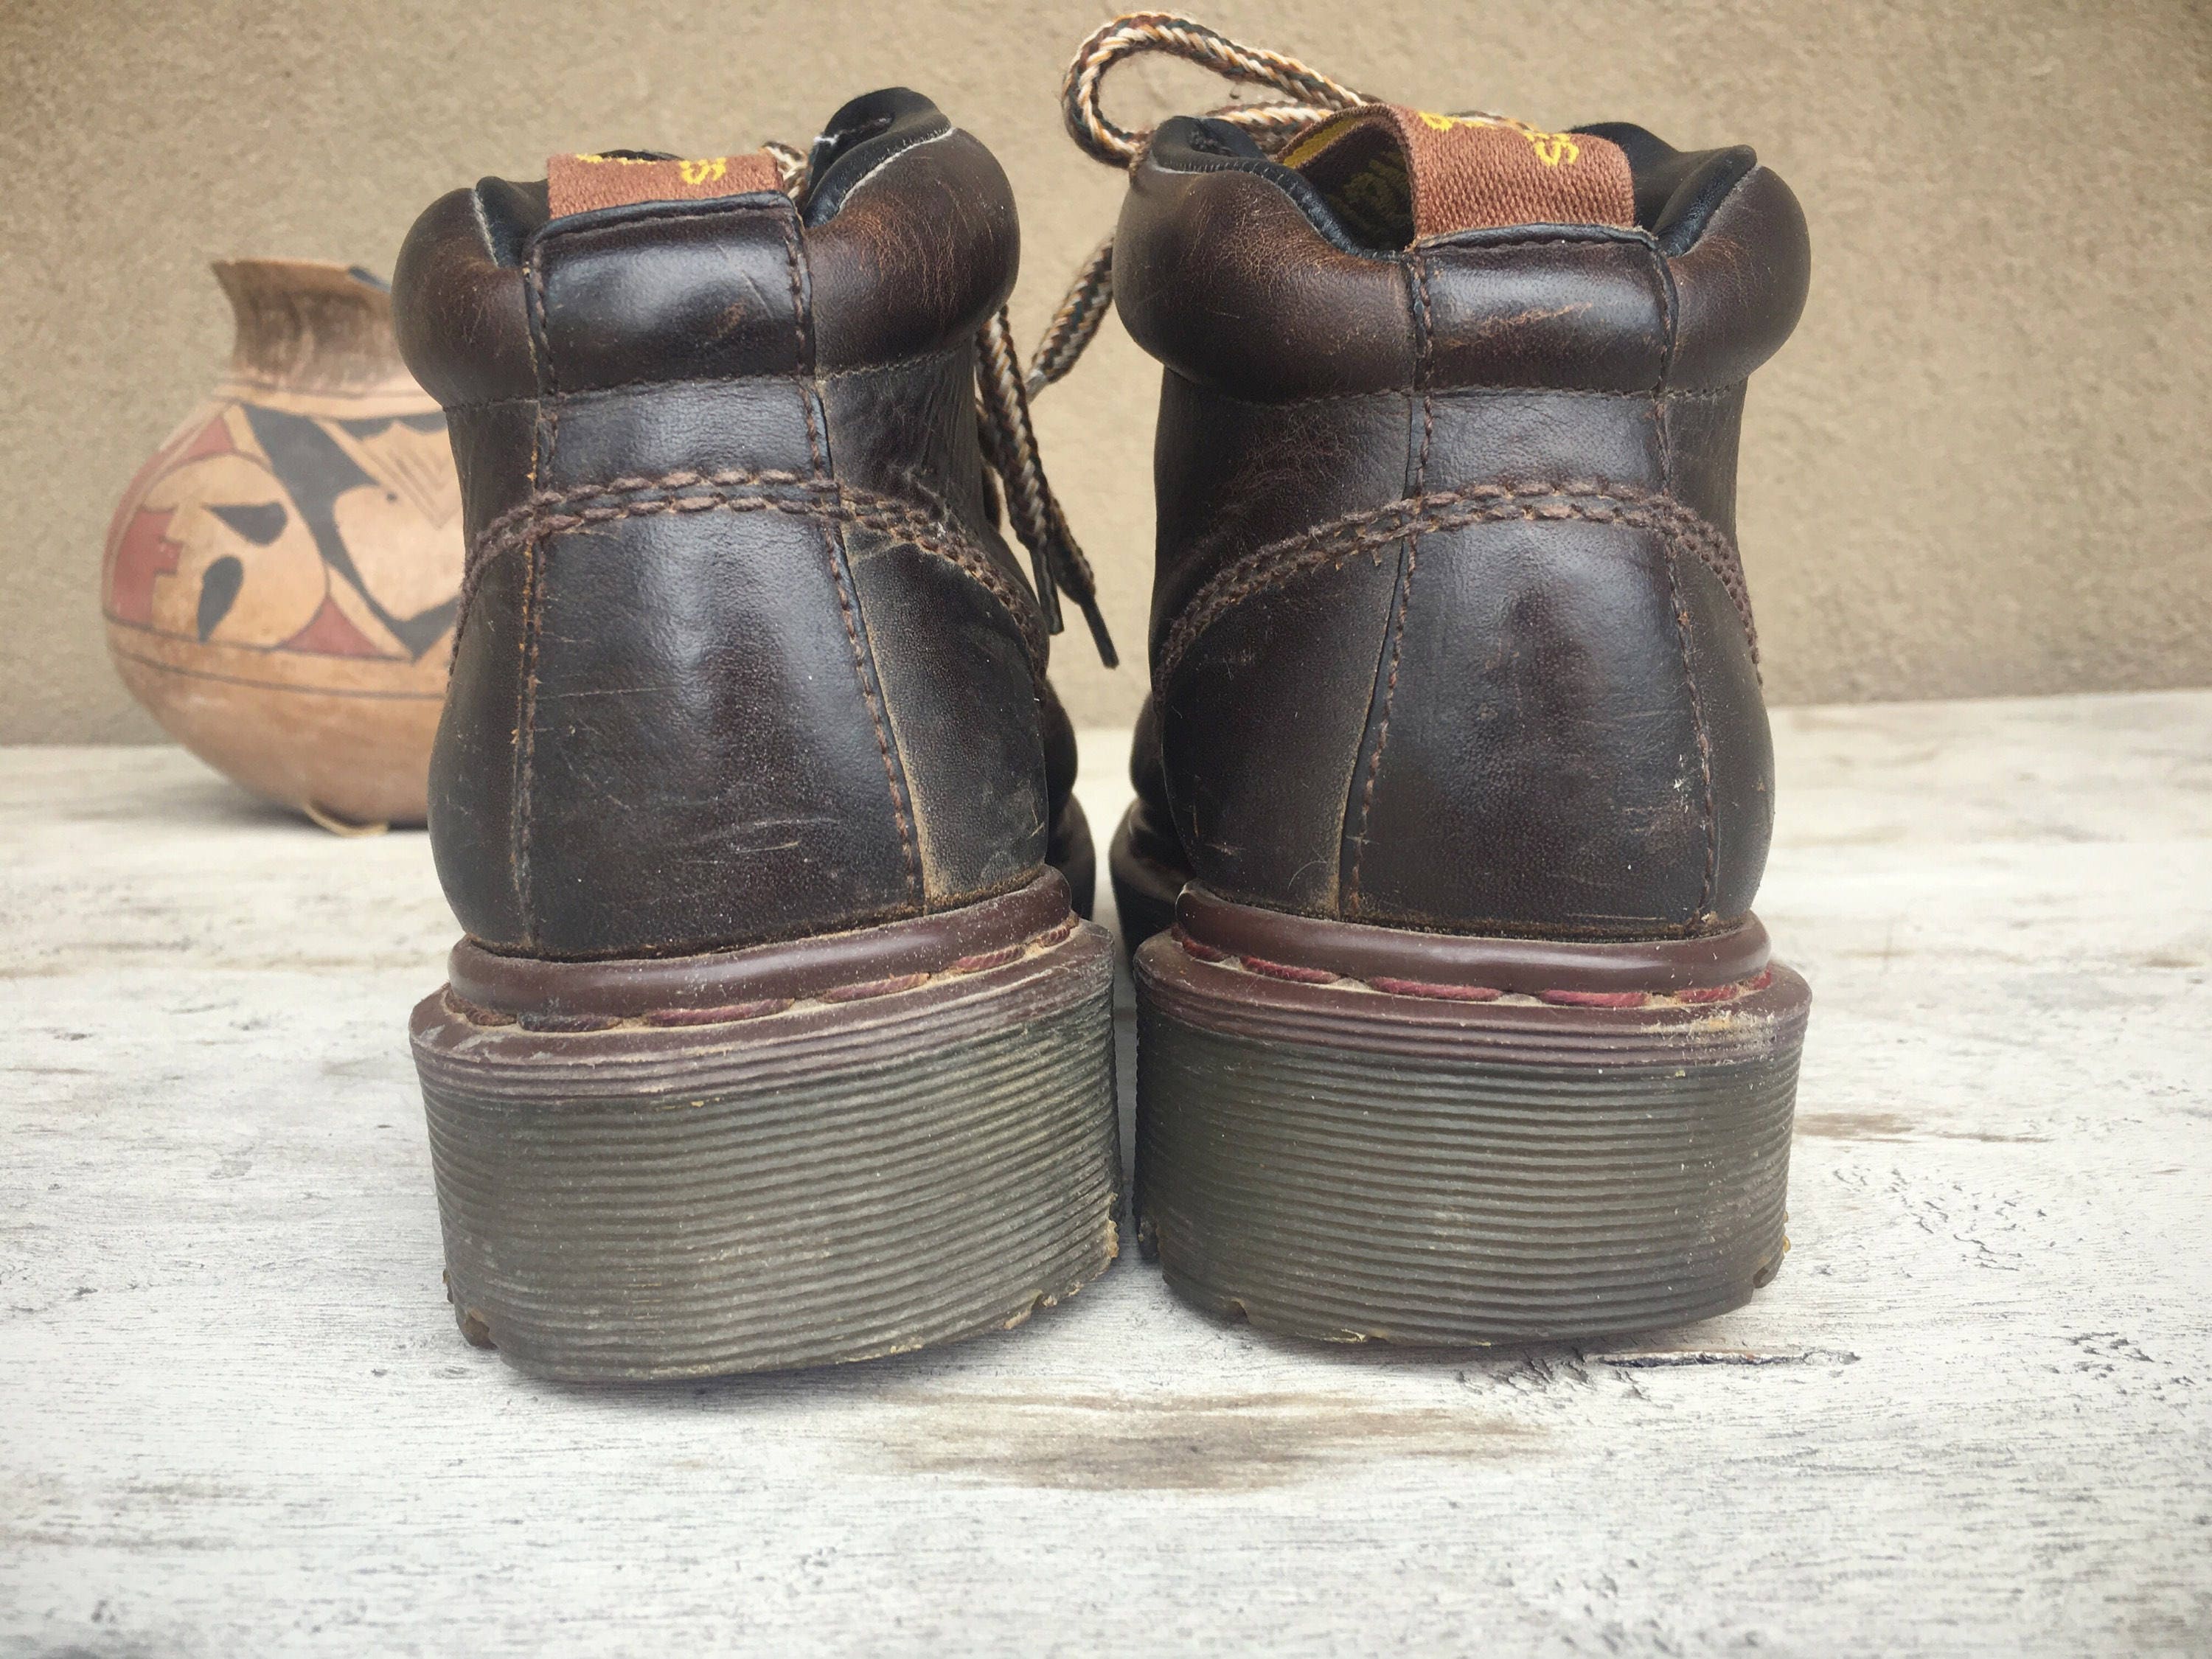 Vintage Dr Martens Hiking Boots UK Size 5 (Runs Small) US Women's Size ...